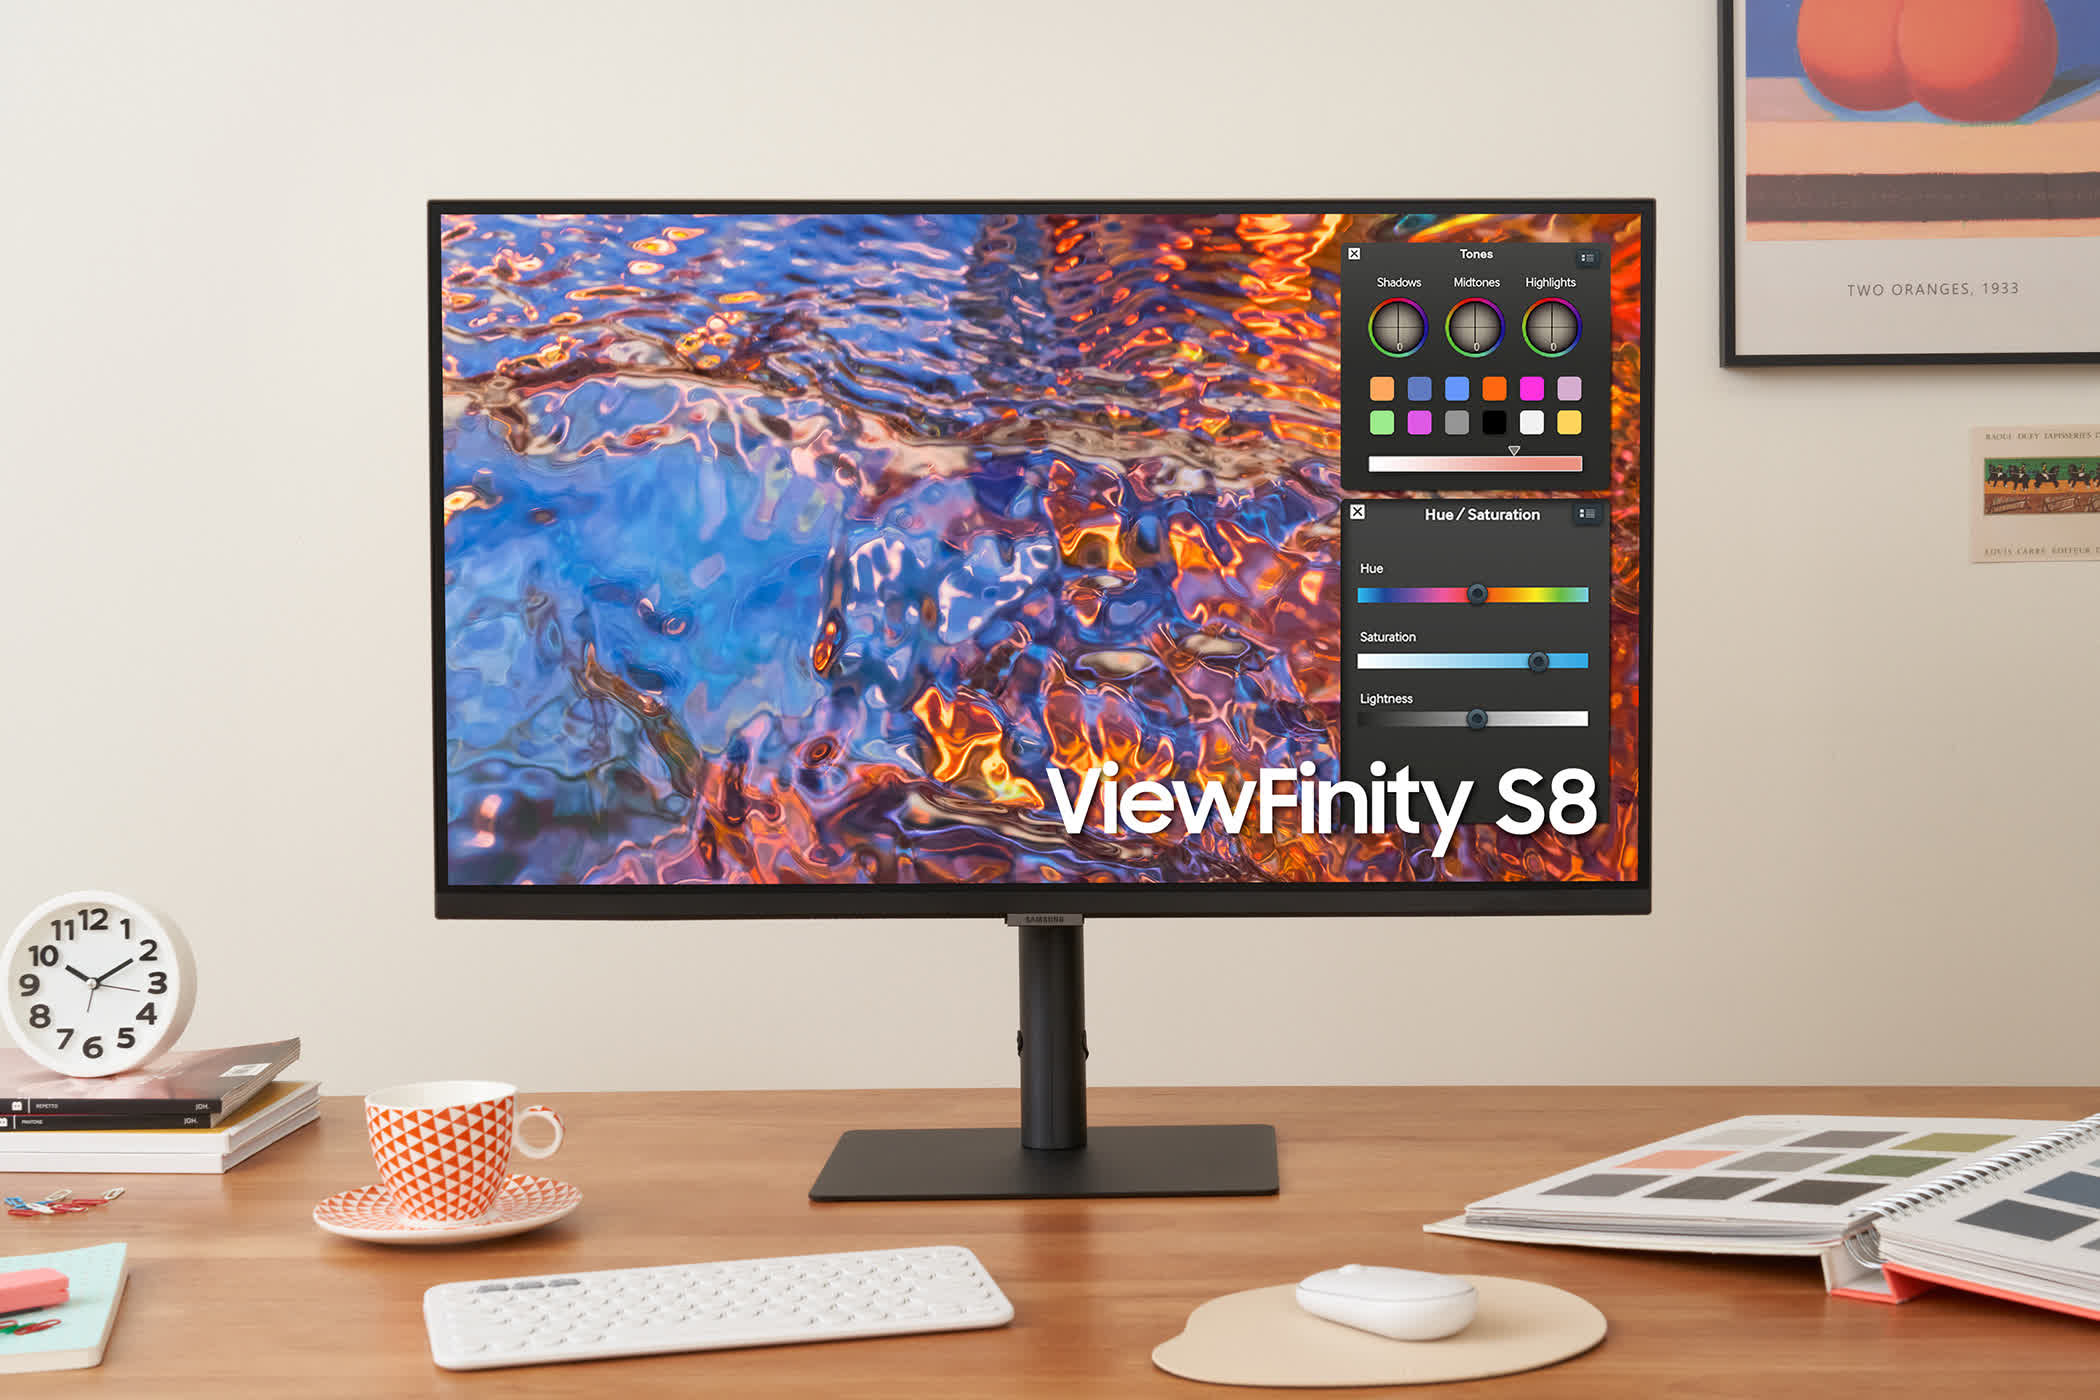 Samsung's ViewFinity S8 high-res monitor caters to creatives and content creators